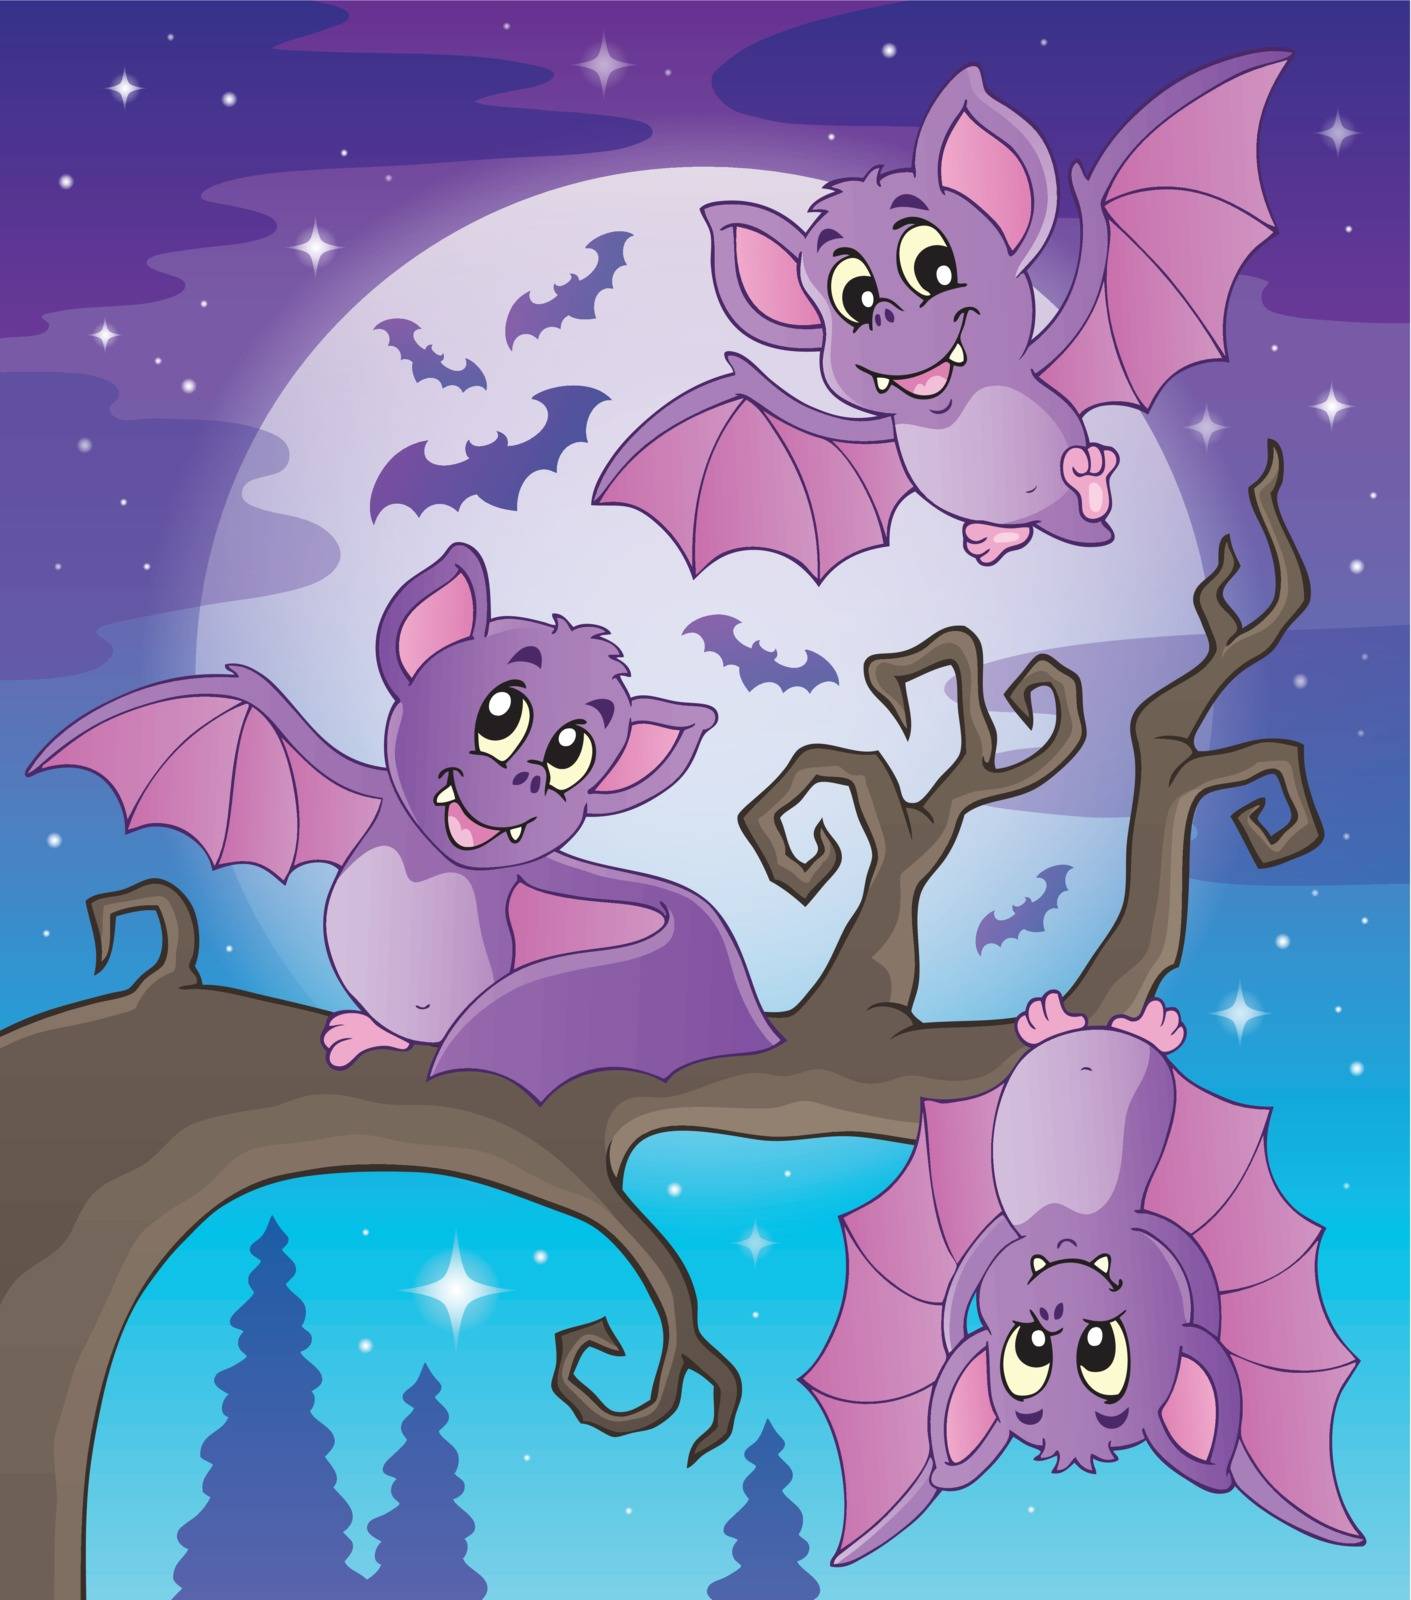 Bats theme image 4 by clairev